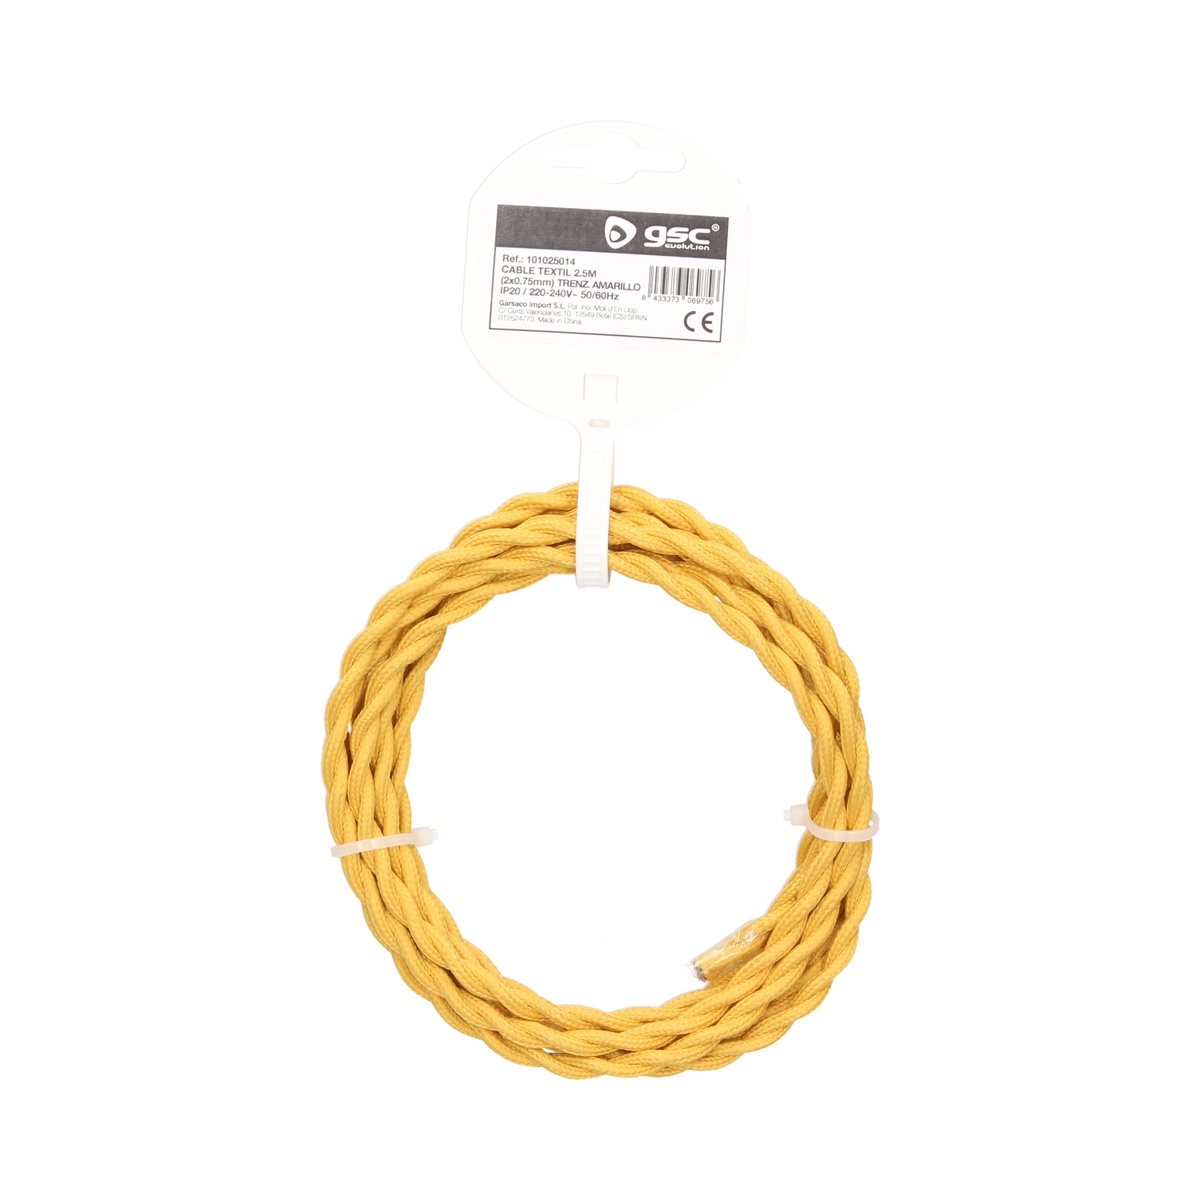 2.5m textile cable (2x0.75mm) Yellow braided